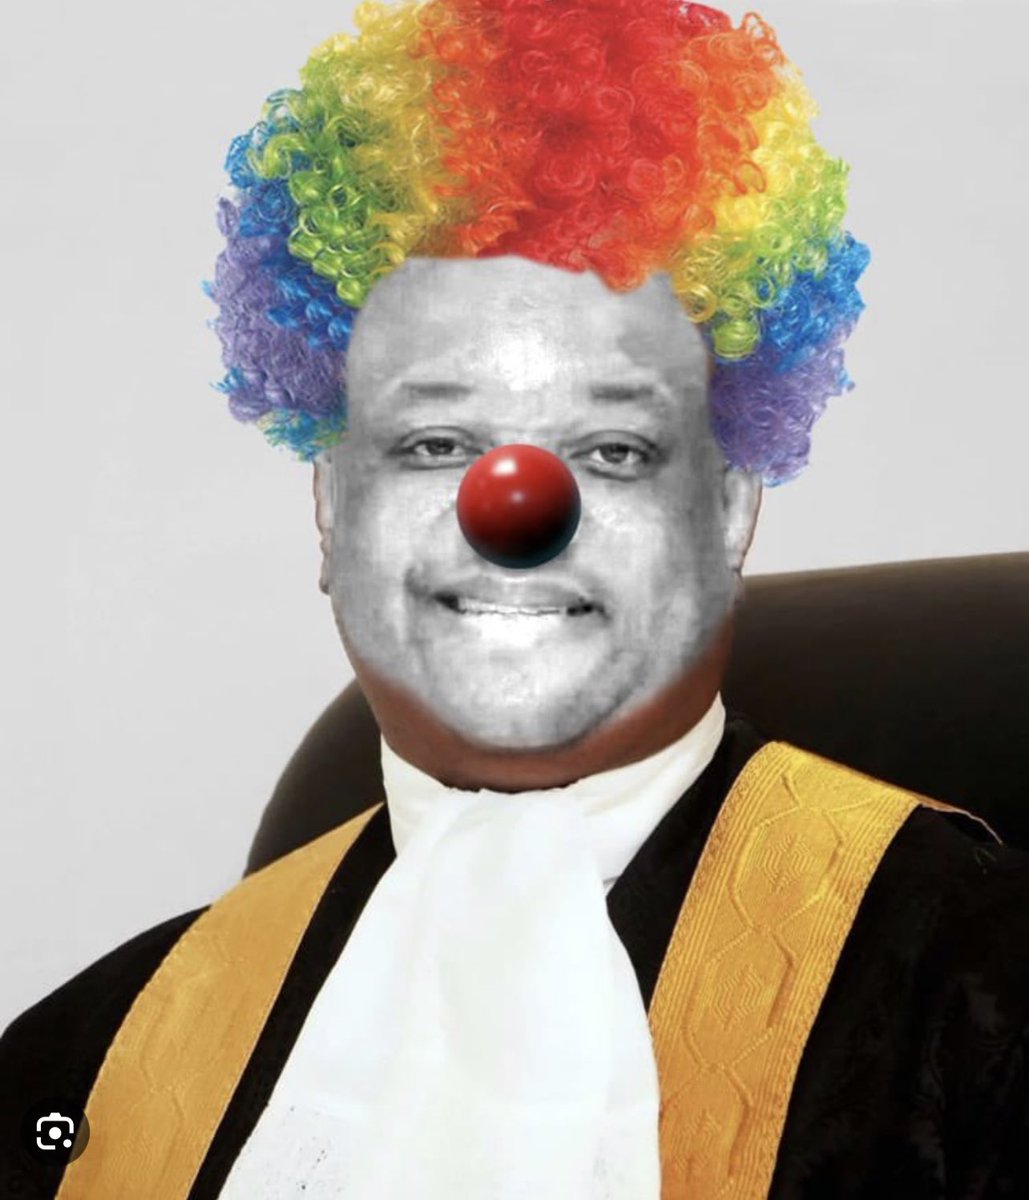 Heard that the errand boy FESTUS 'SANdalili' KEYAMO lost again in court today. This clown is a disgrace to the term 'SAN'

His own SAN na 'Senior Advocate of Ndị Ara (Mad People)' 😂
---
PDP Witness | Messi | Iyabo Ojo | #NLCStrike |25% in FCT |Yul Edochie| Keyamo| El-Rufai